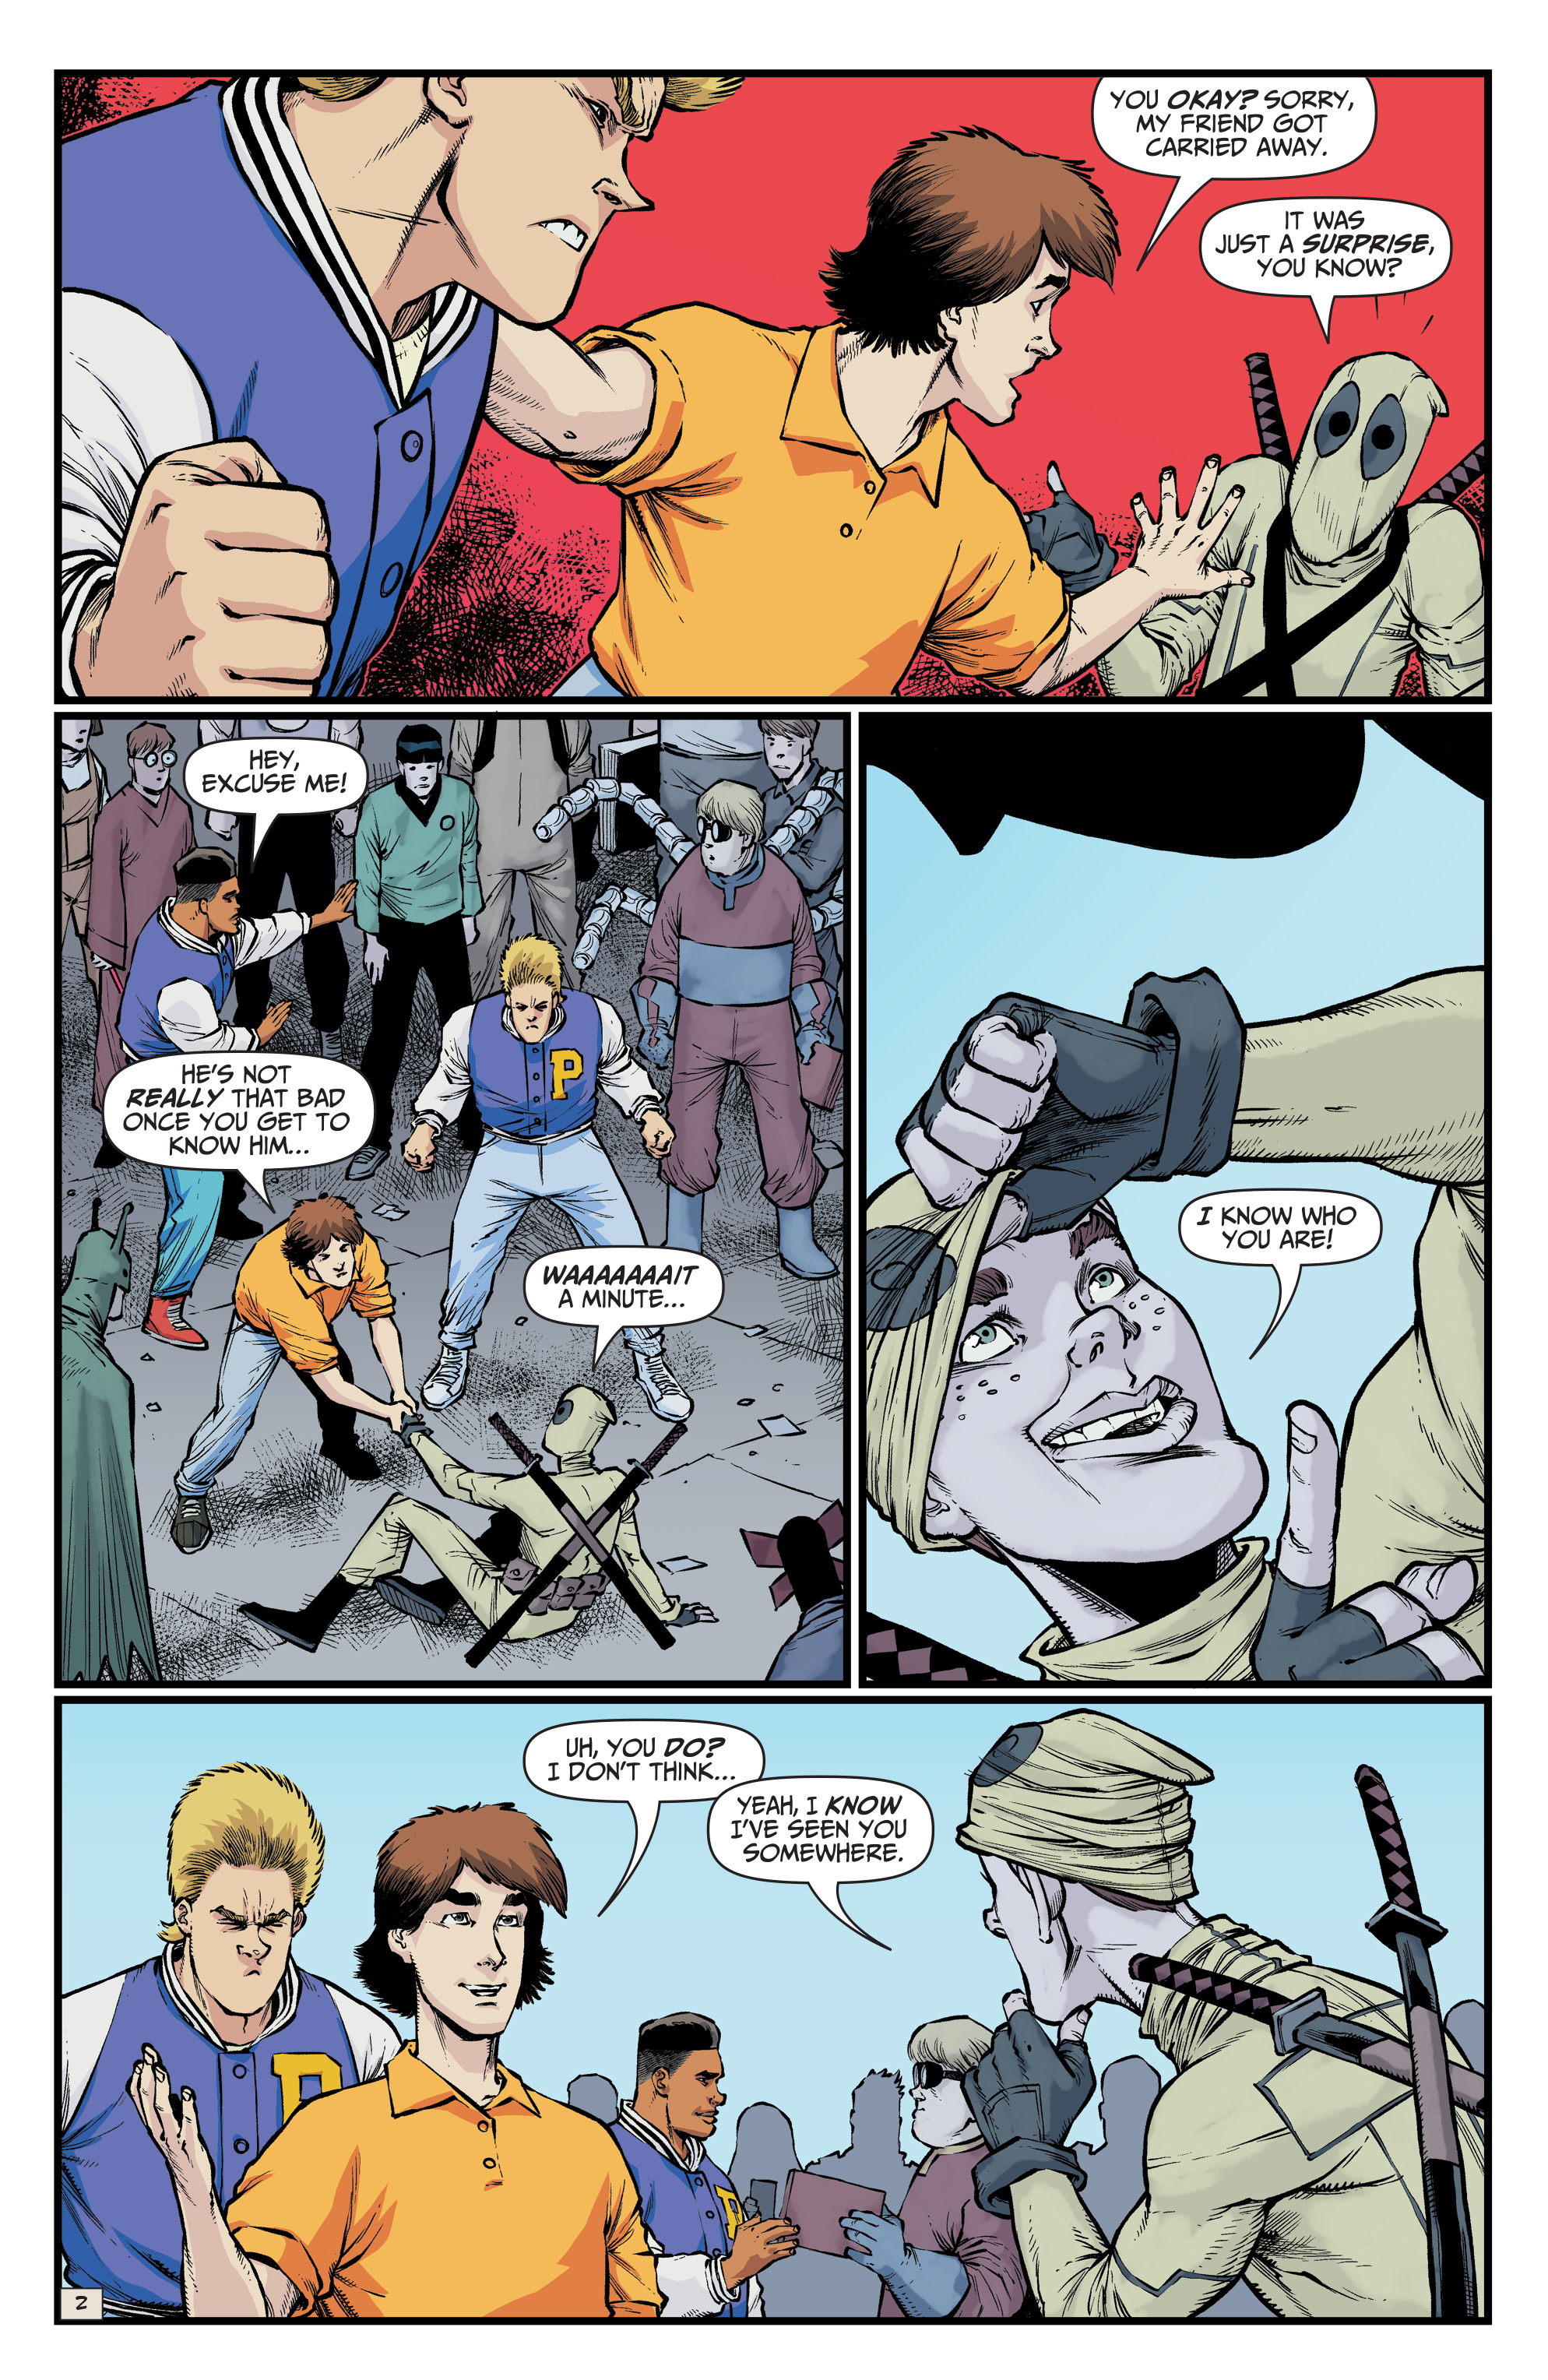 Planet Of The Nerds (2019-): Chapter 2 - Page 4